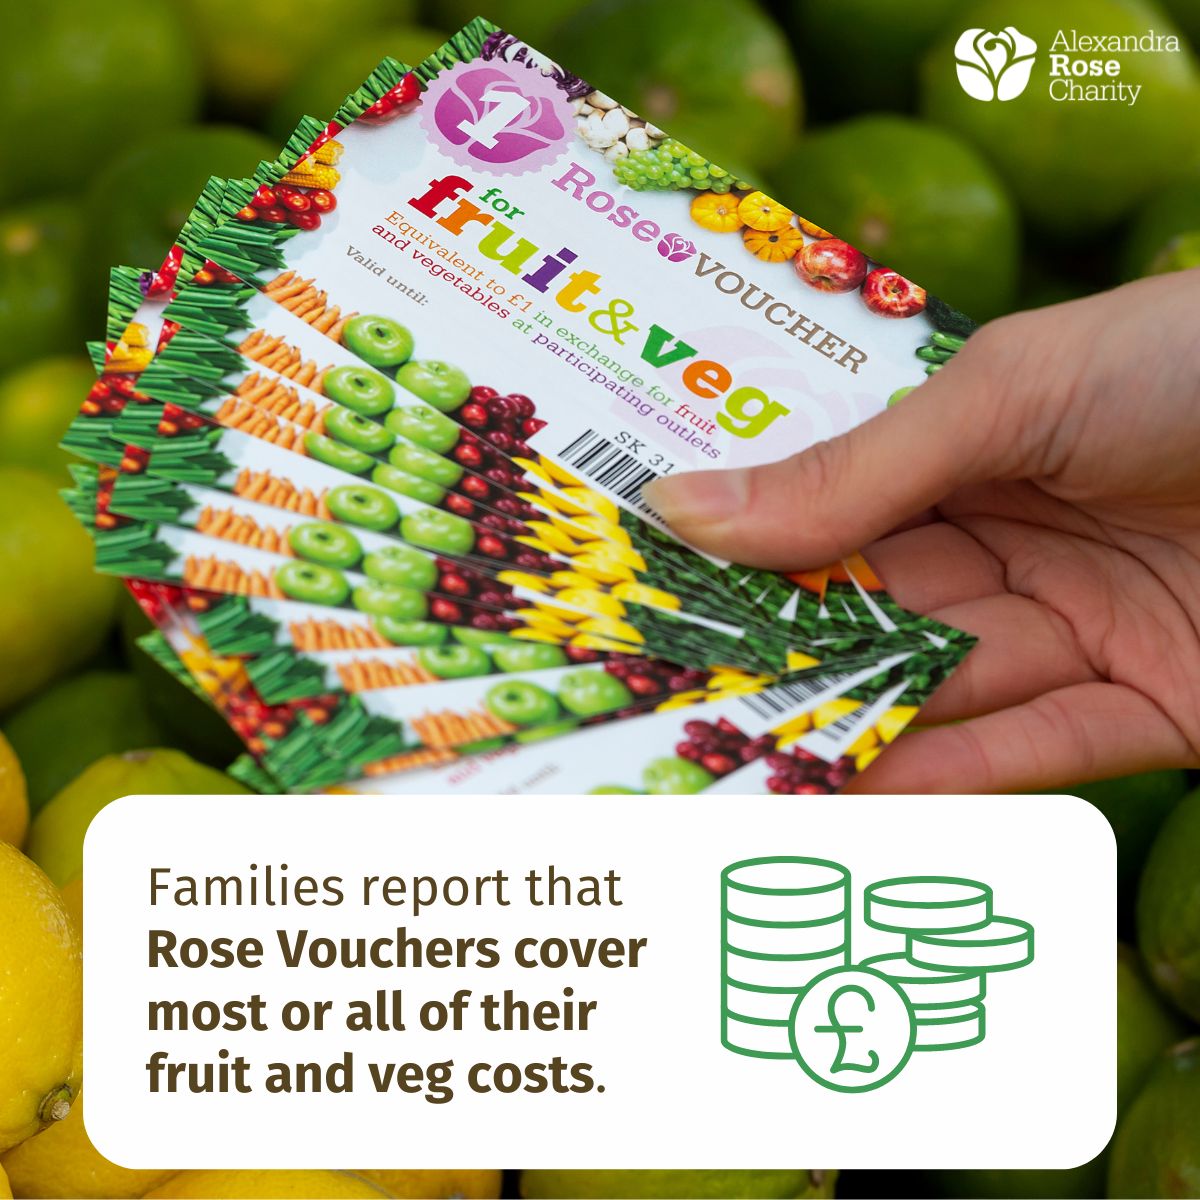 Rose Vouchers ease financial worry around food, with parents receiving Rose Vouchers telling us they can now prioritise nutritional value and variety of fruit and veg, over cost.